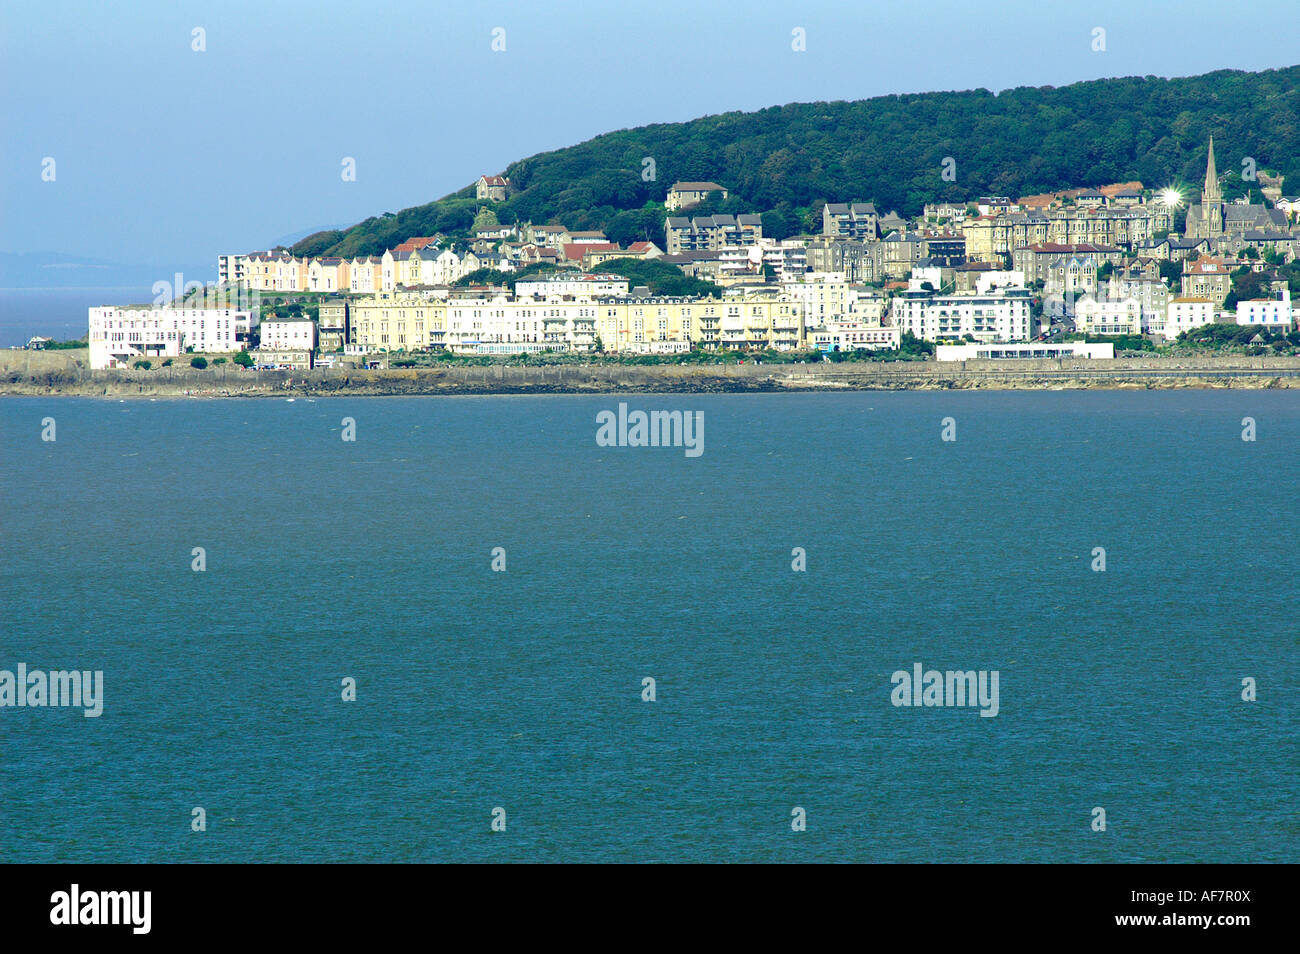 Weston Super Mare seafront, houses on the hillside, bay of Bristol Channel. England Stock Photo